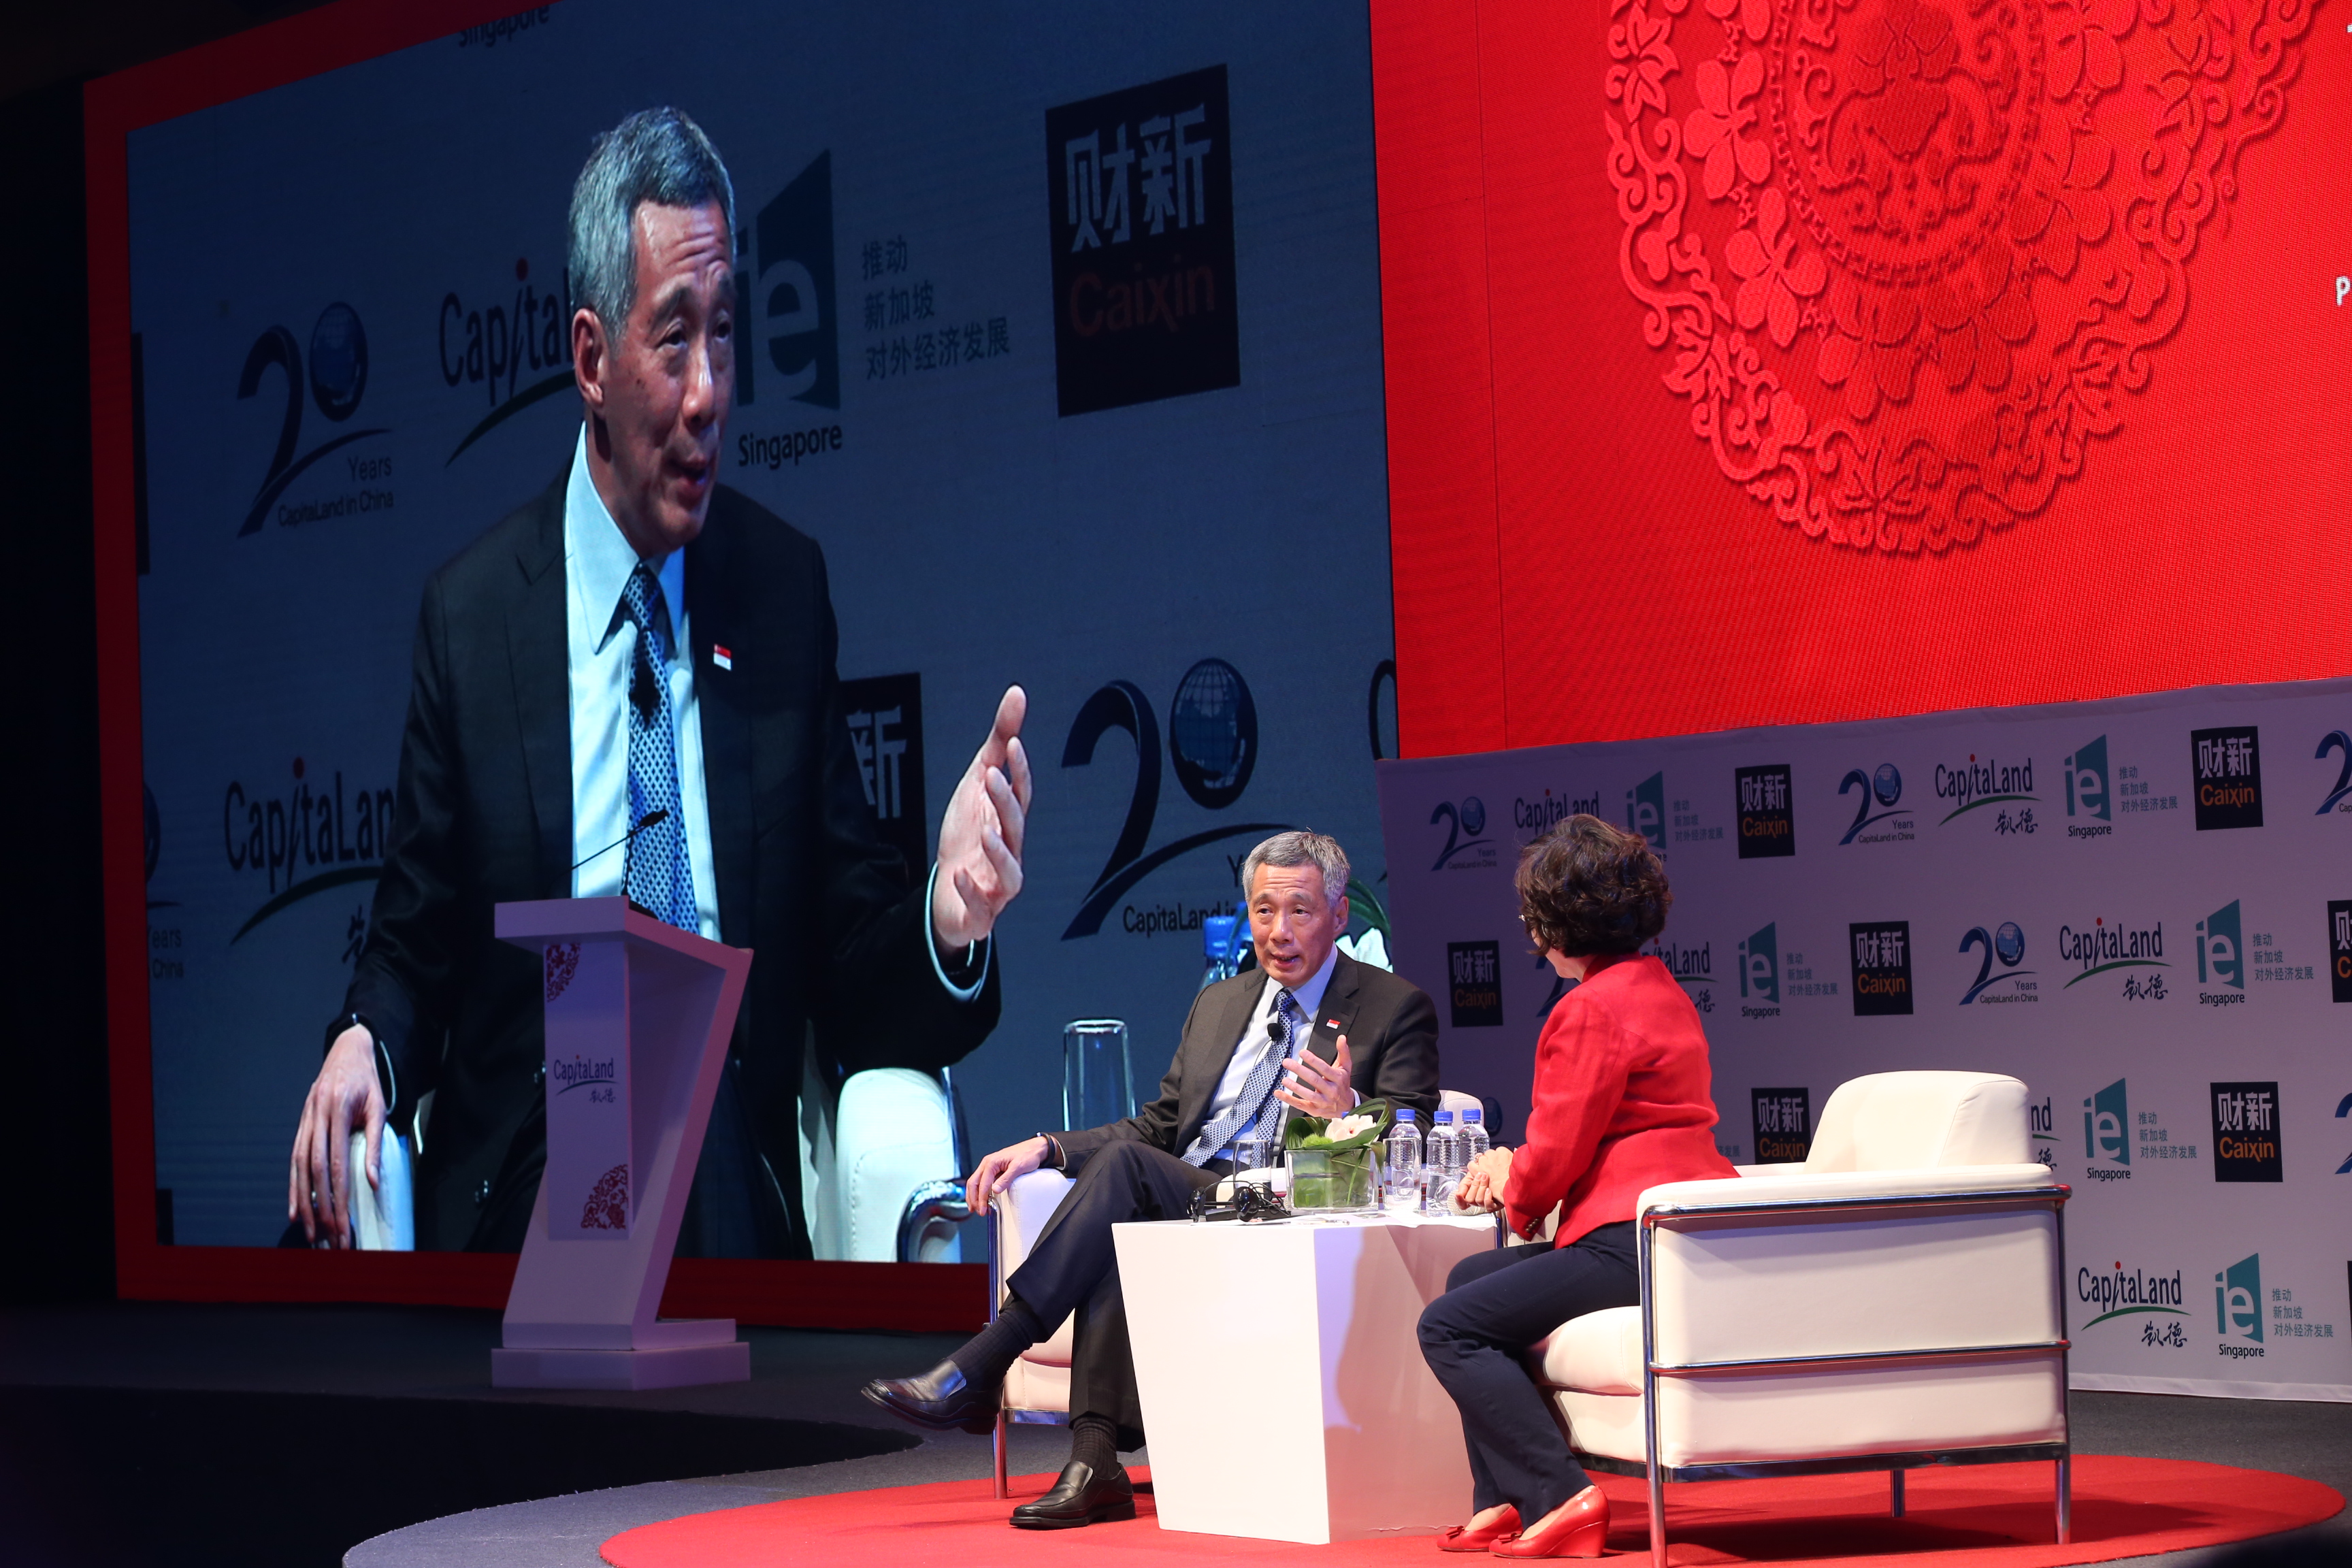 Prime Minister Lee Hsien Loong as the Guest of Honour at CapitaLand’s China-Singapore Dialogue in Beijing, China on 9 Nov 2014 (MCI Photo By LH Goh)